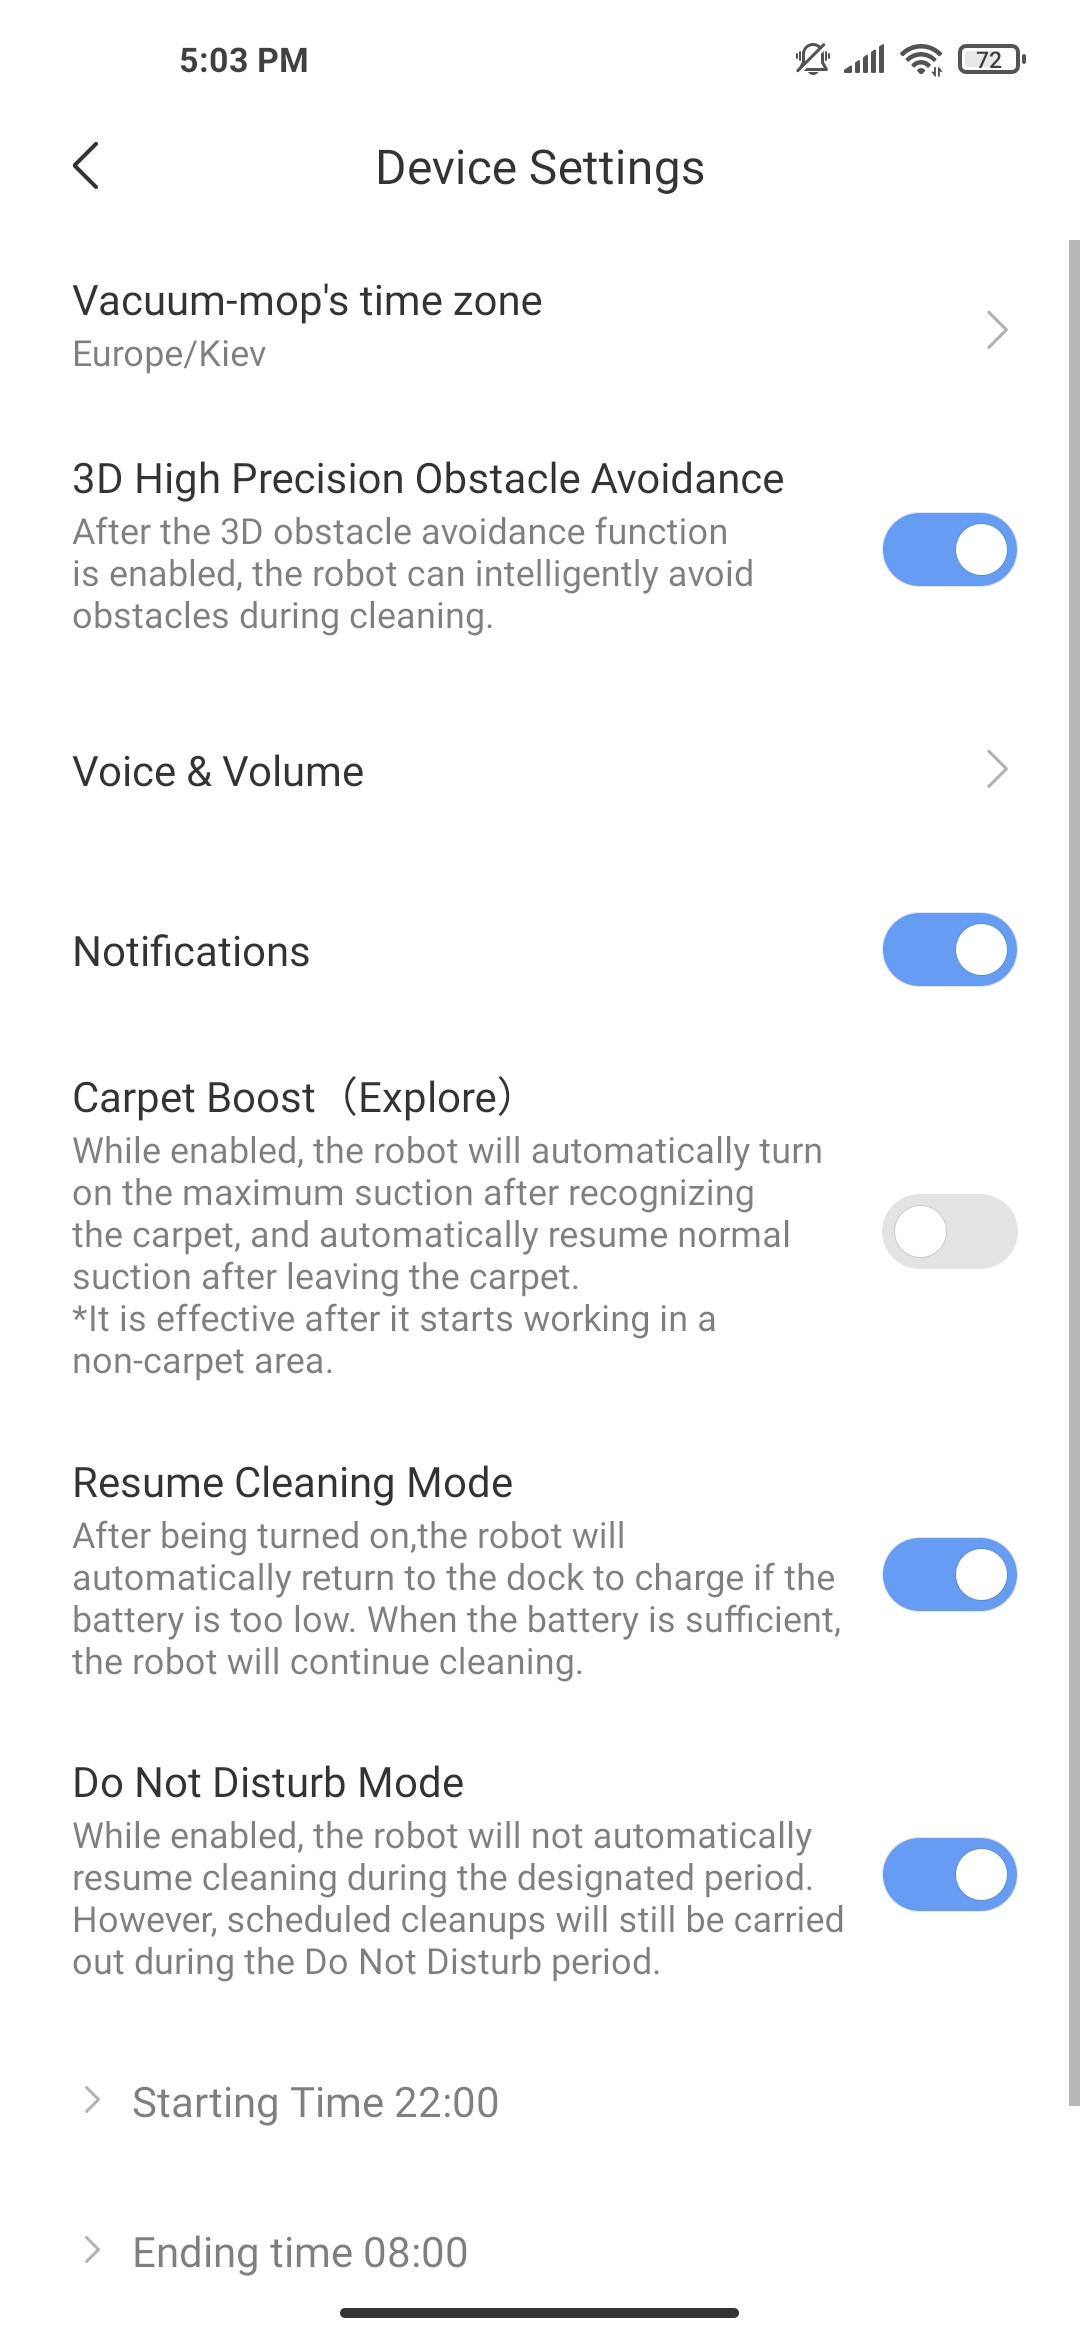 Additional device settings